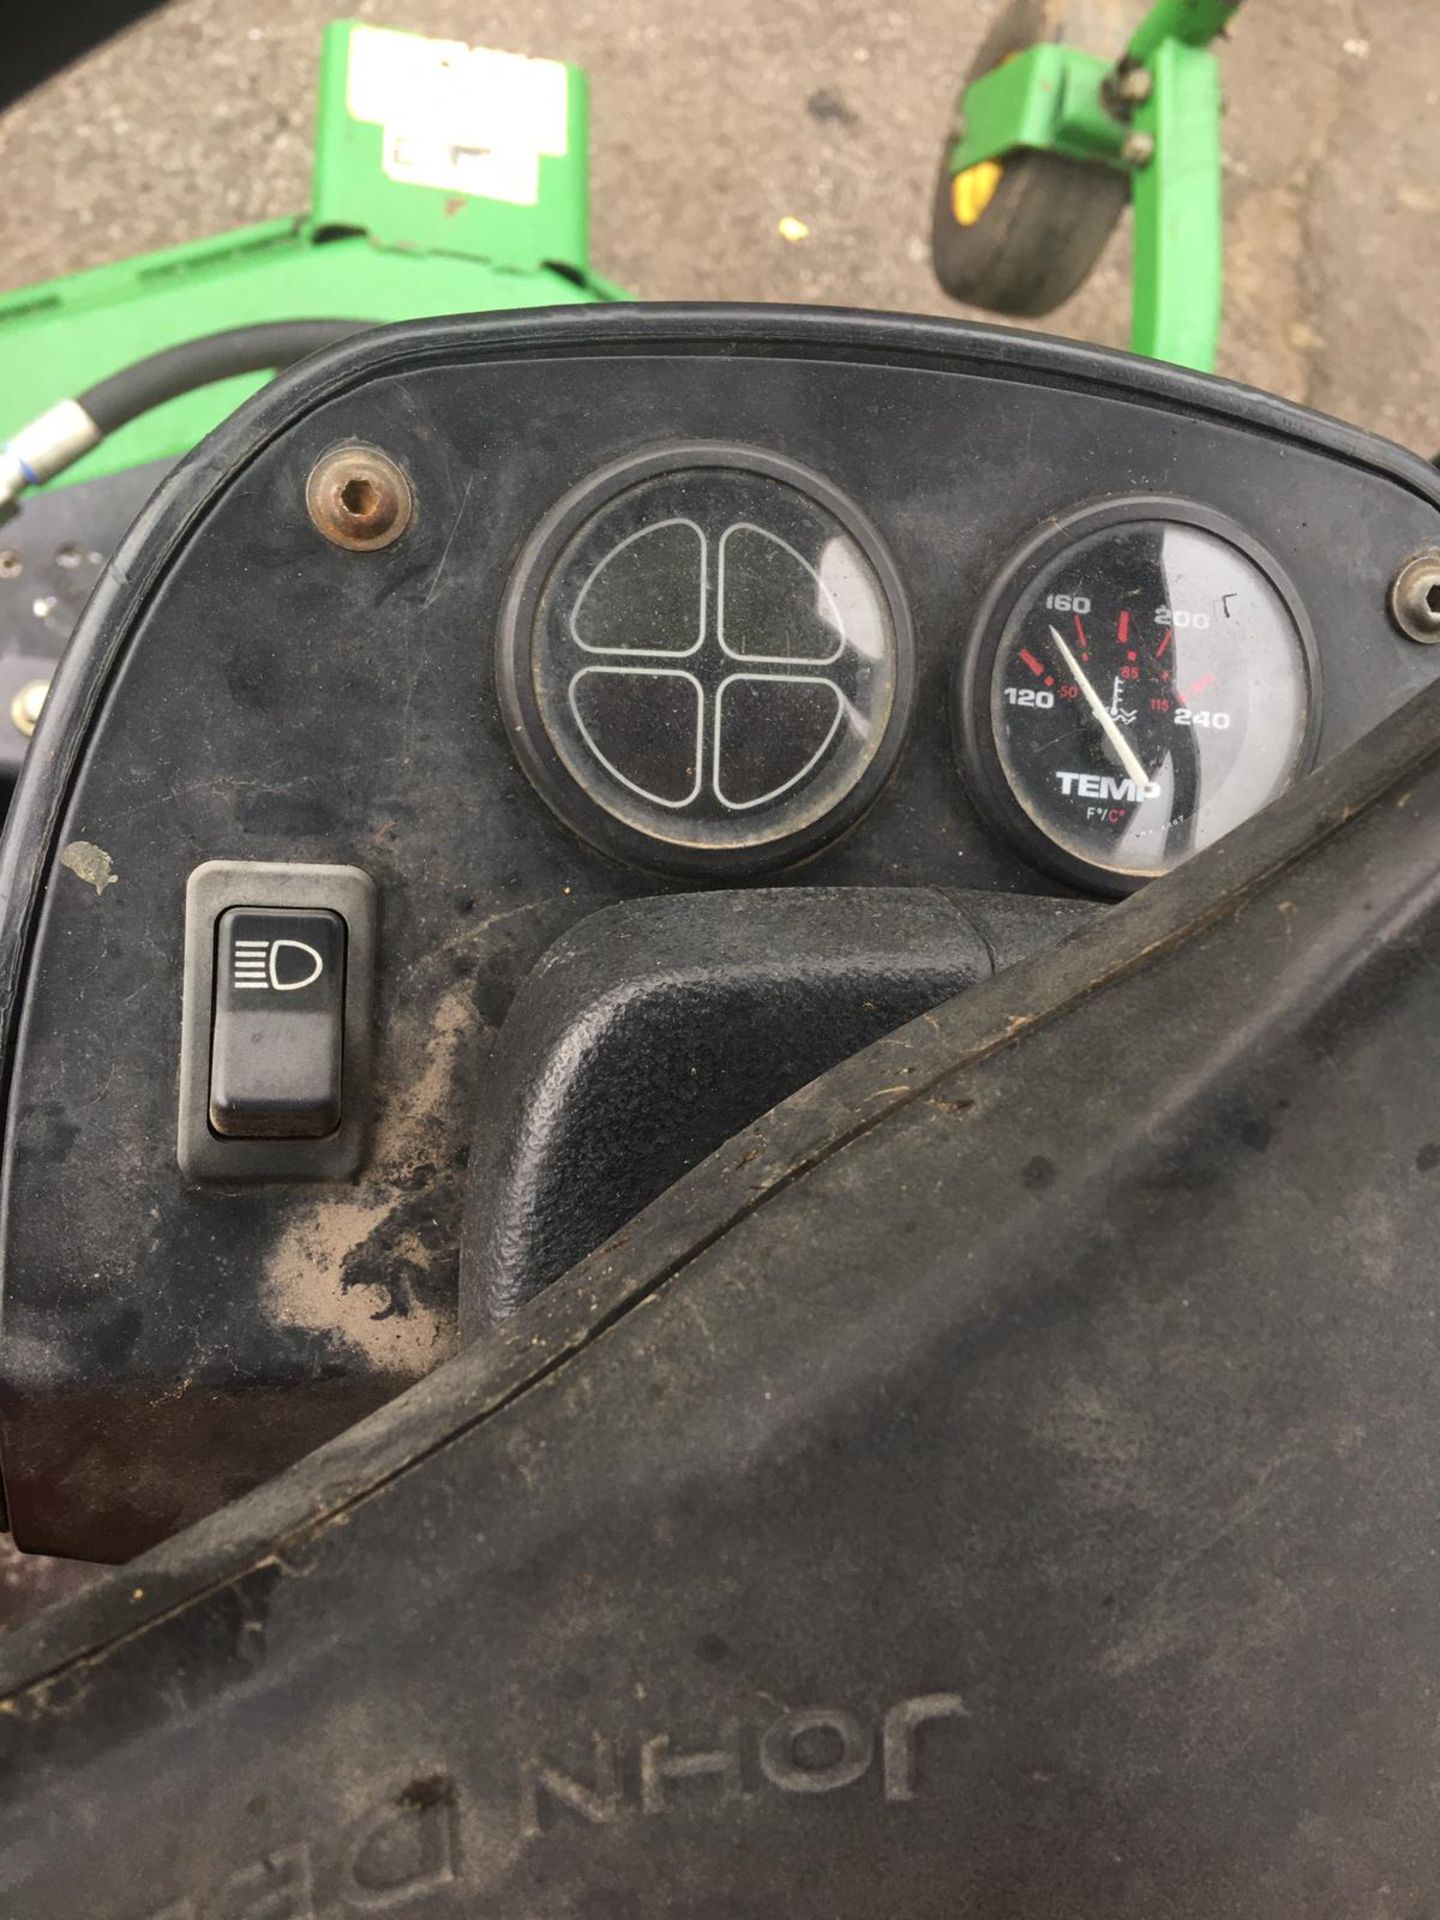 JOHN DEERE 1600 WIDE AREA TURBO BATWING RIDE ON LAWN MOWER, CRUISE CONTROL, RUNS & WORKS *NO VAT* - Image 13 of 24